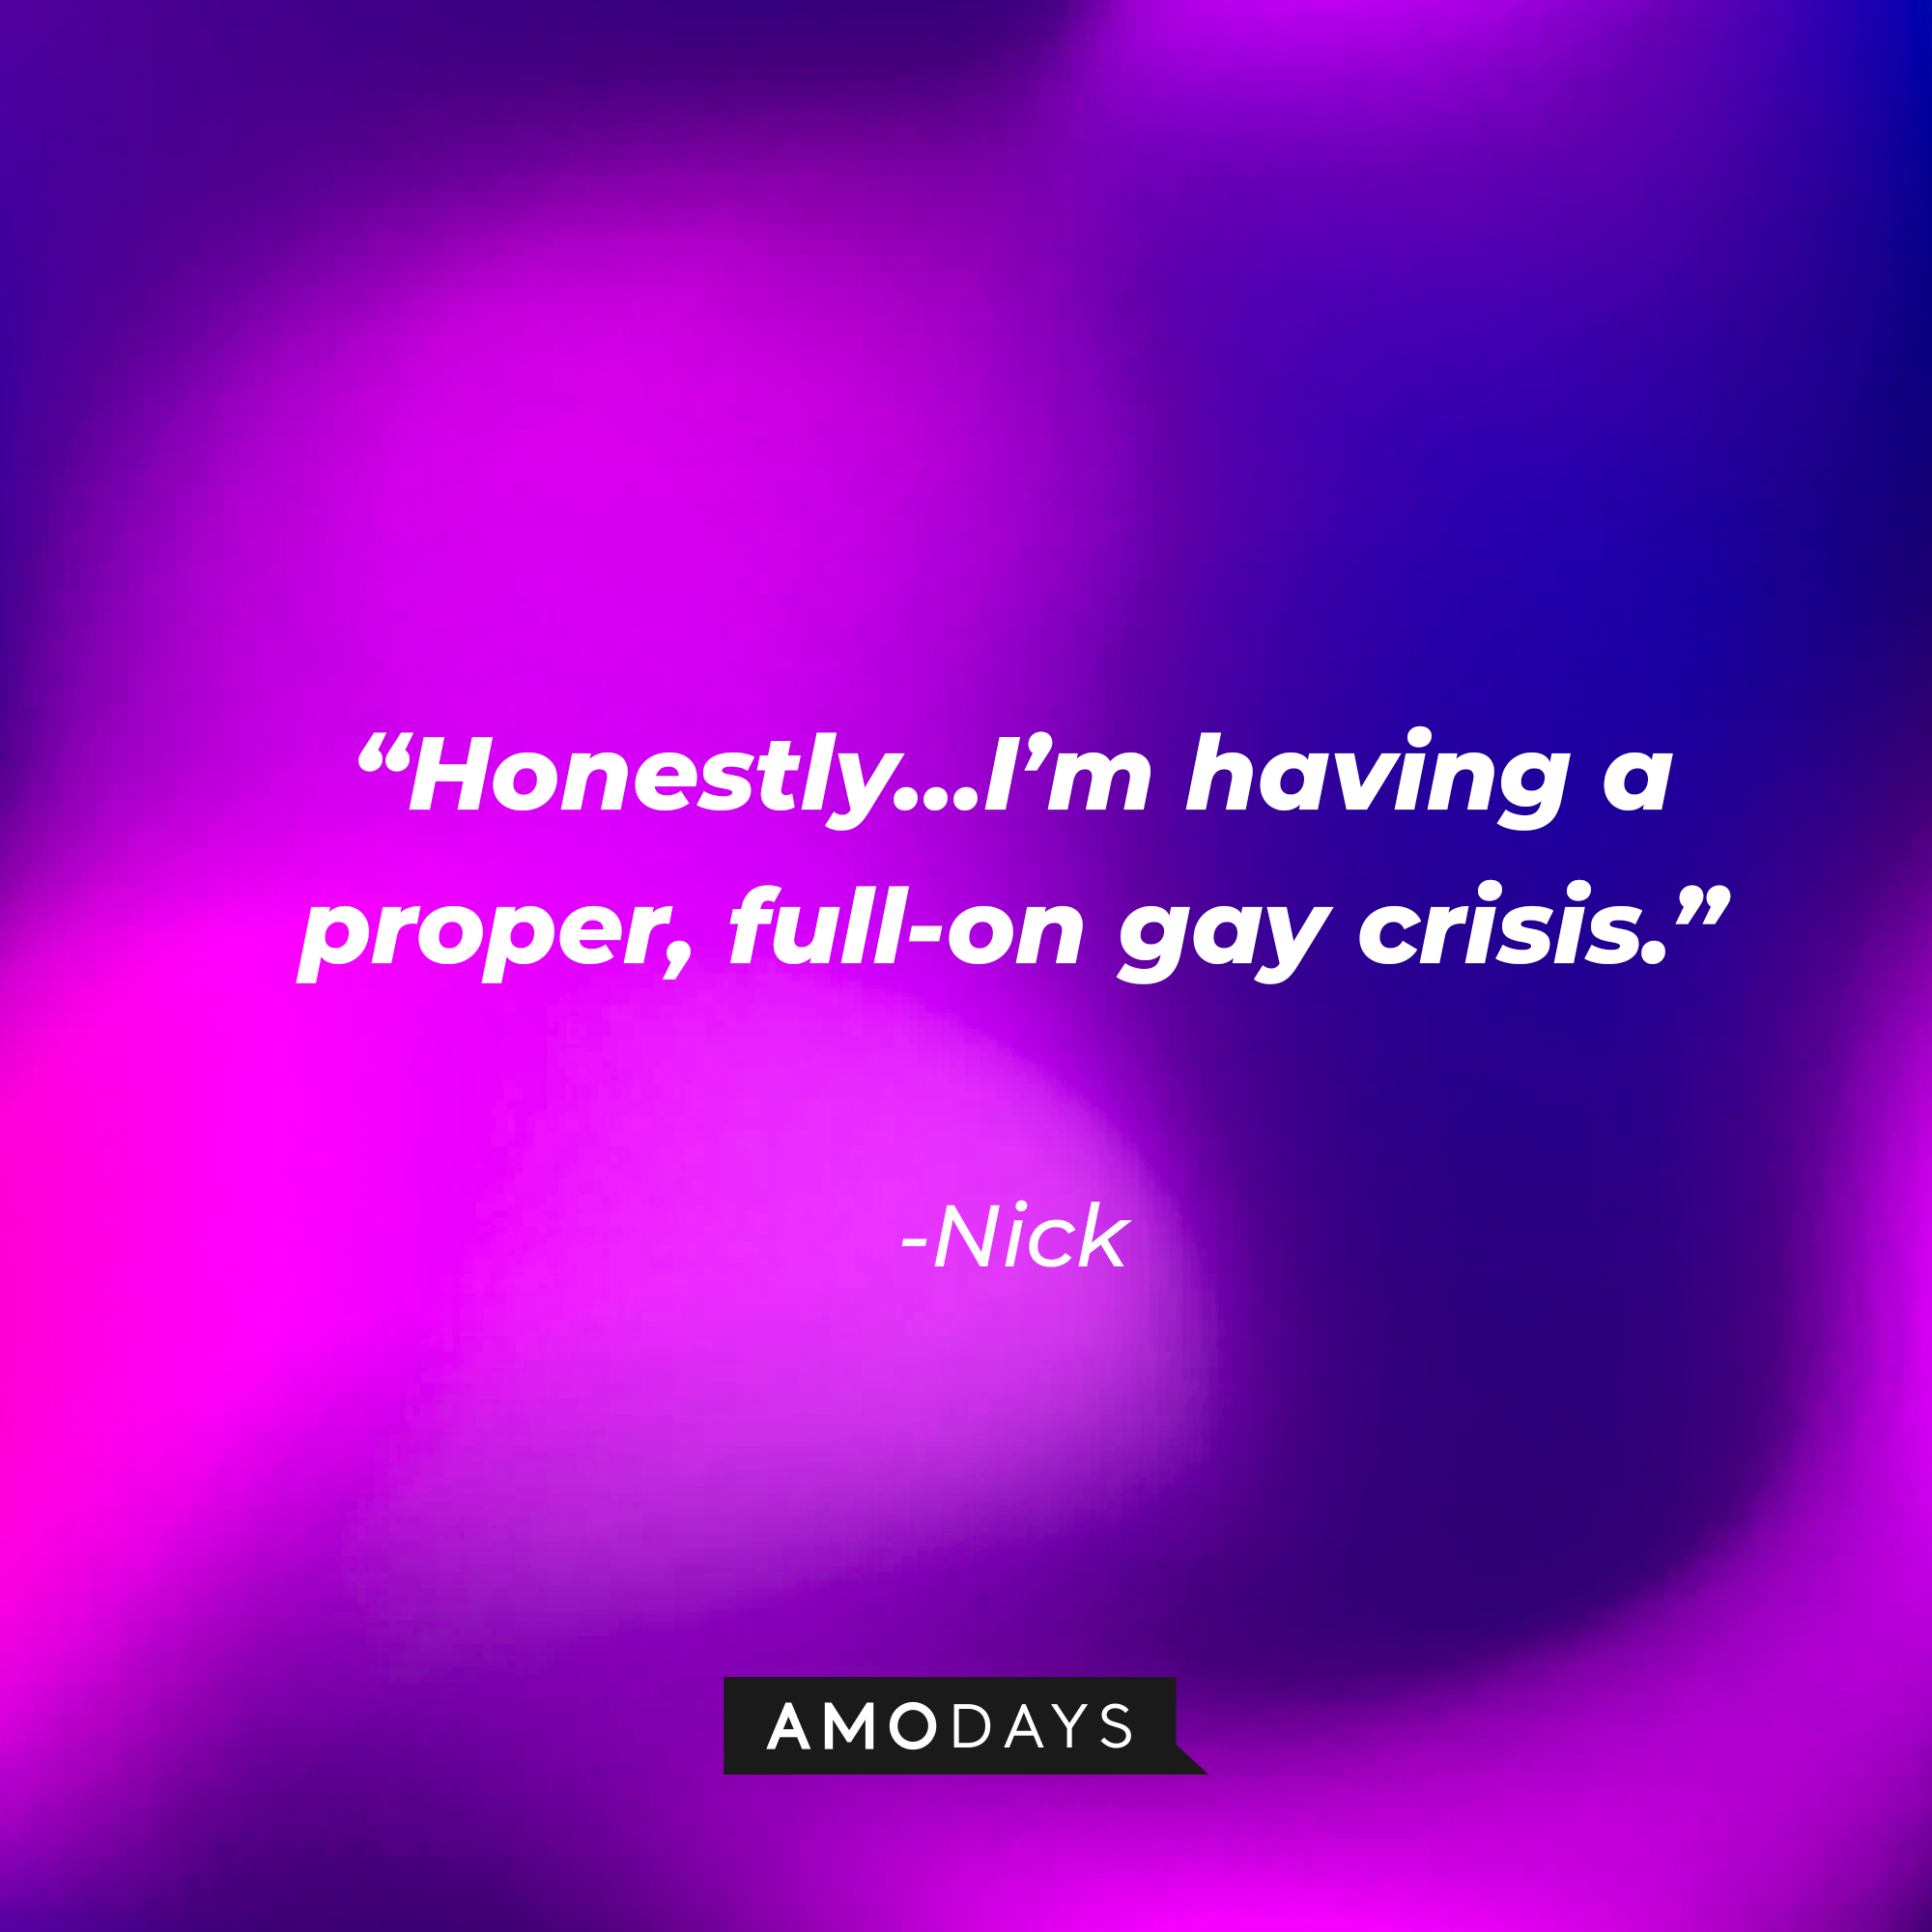 Nick’s quote: “Honestly…I’m having a proper, full-on gay crisis.” | Source: AmoDays